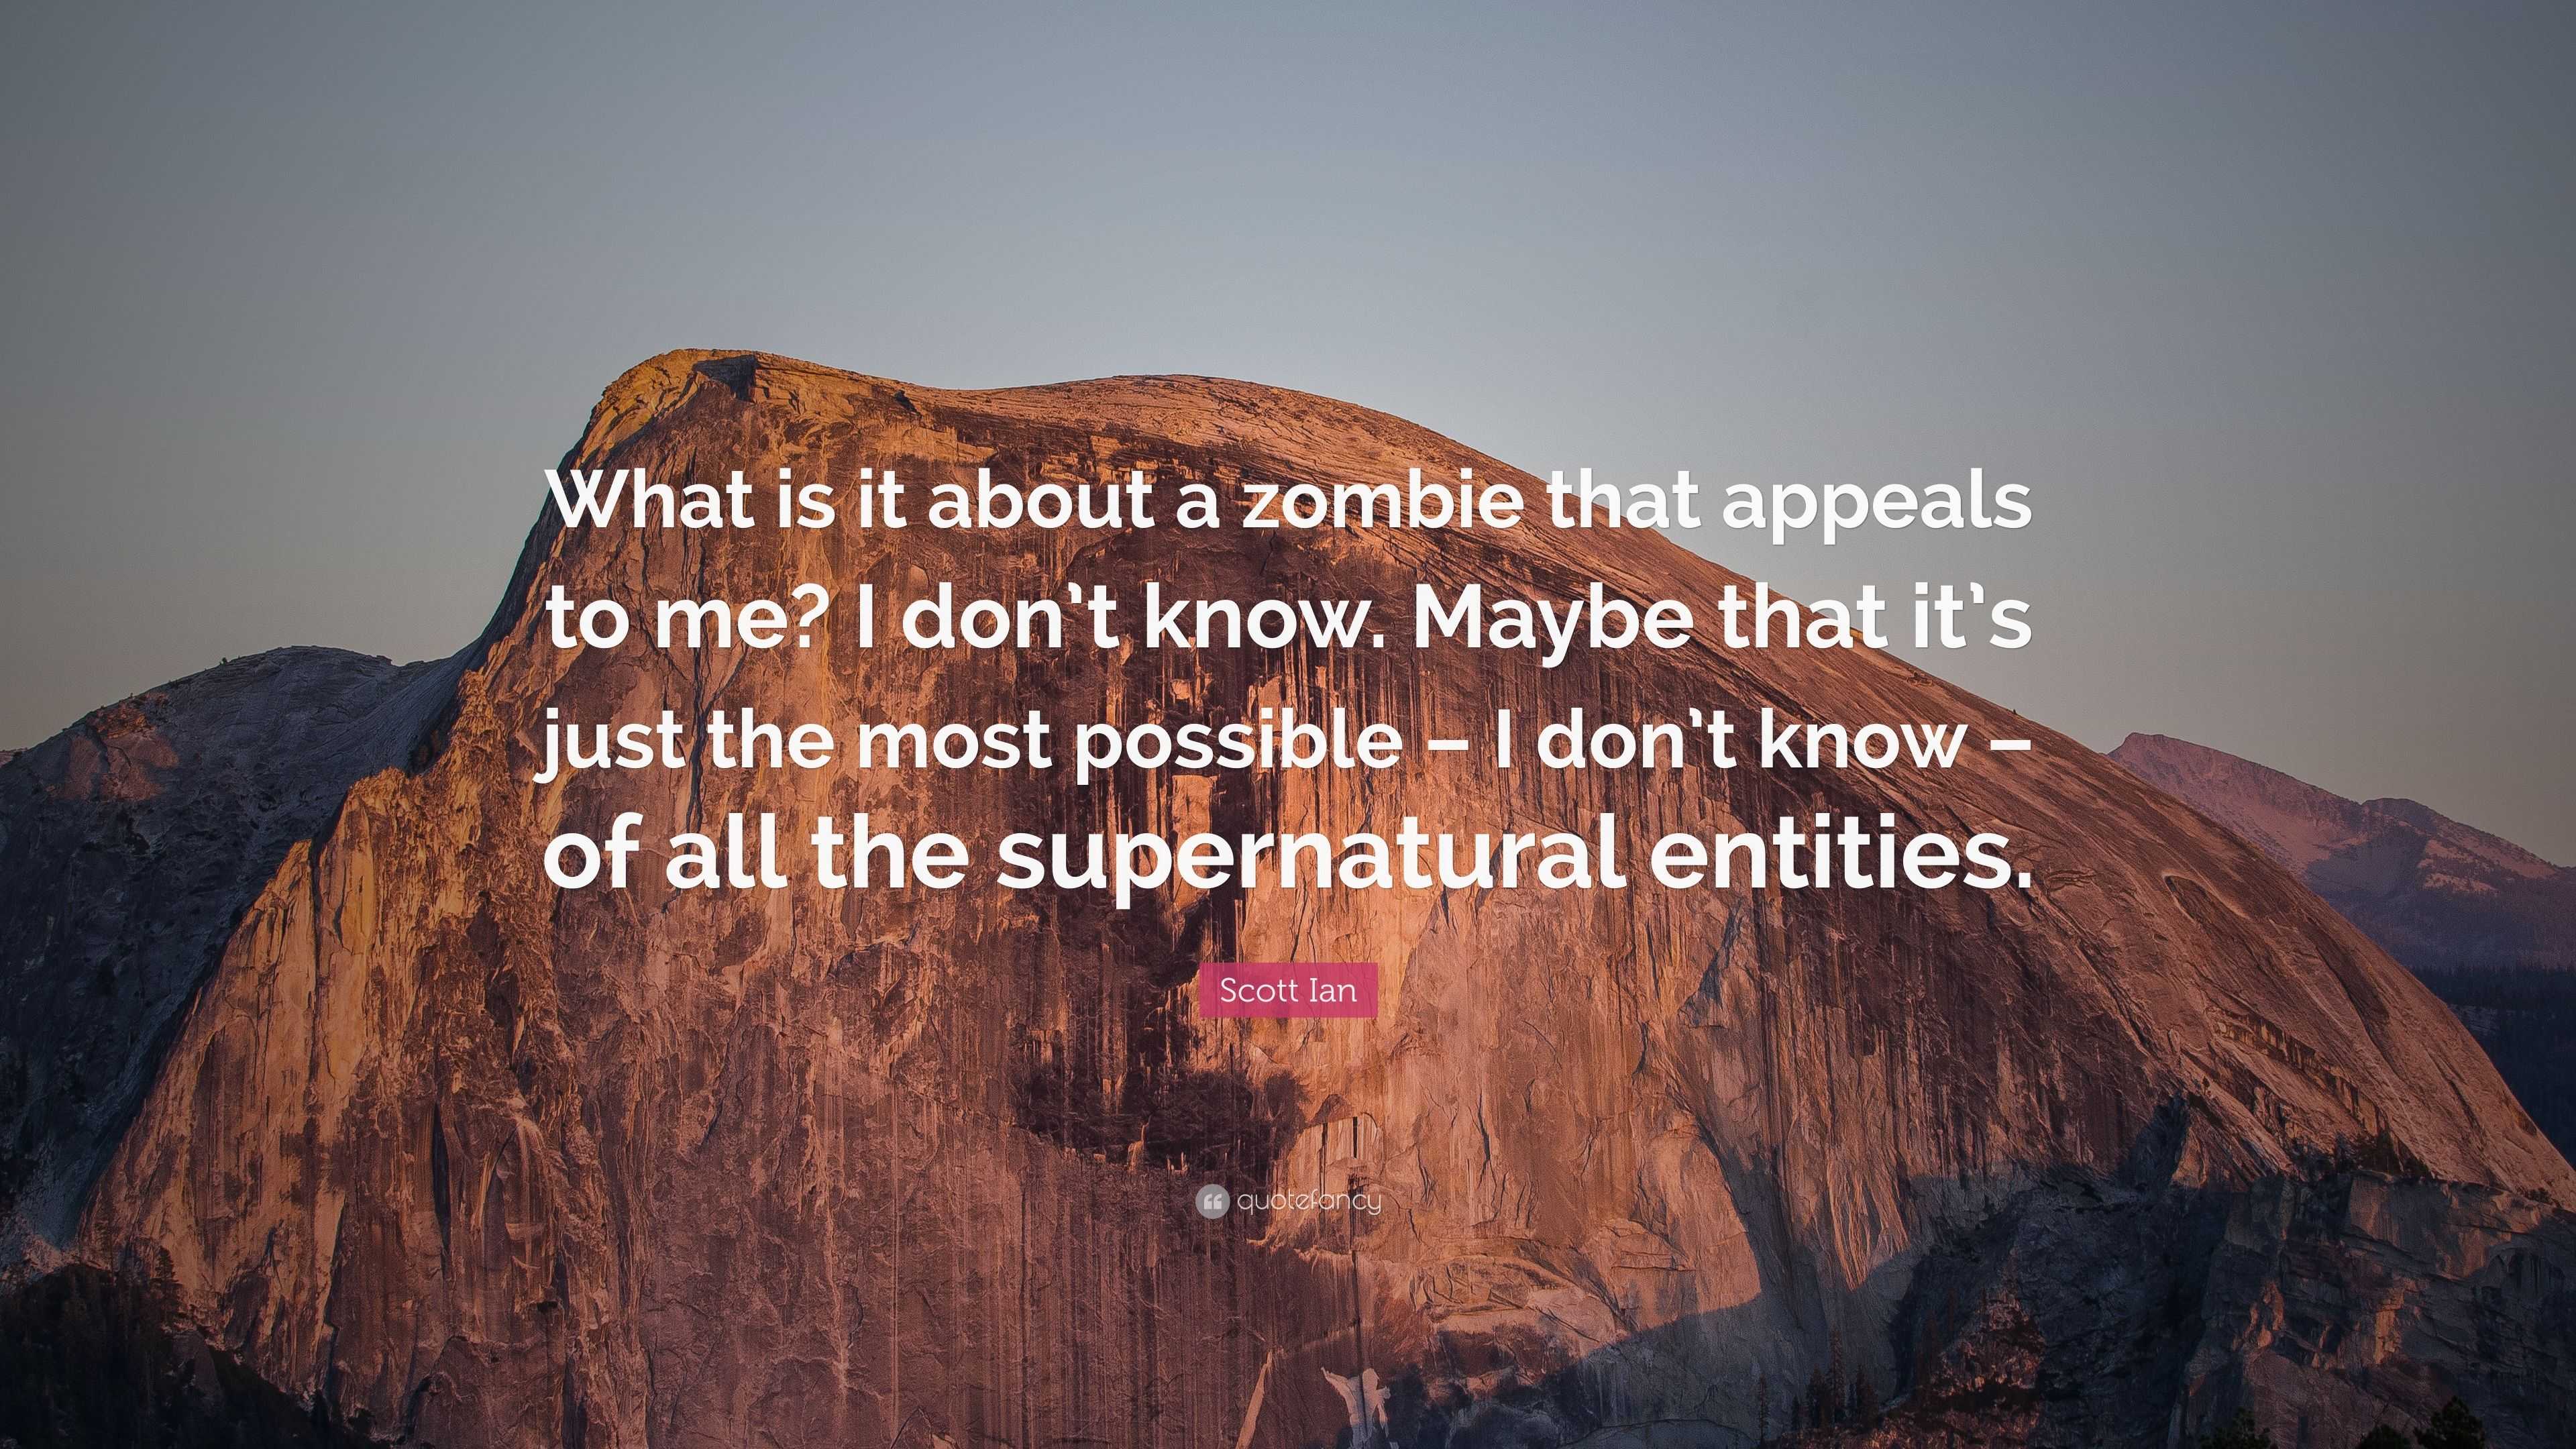 Scott Ian Quote “What is it about a zombie that appeals to me I ...